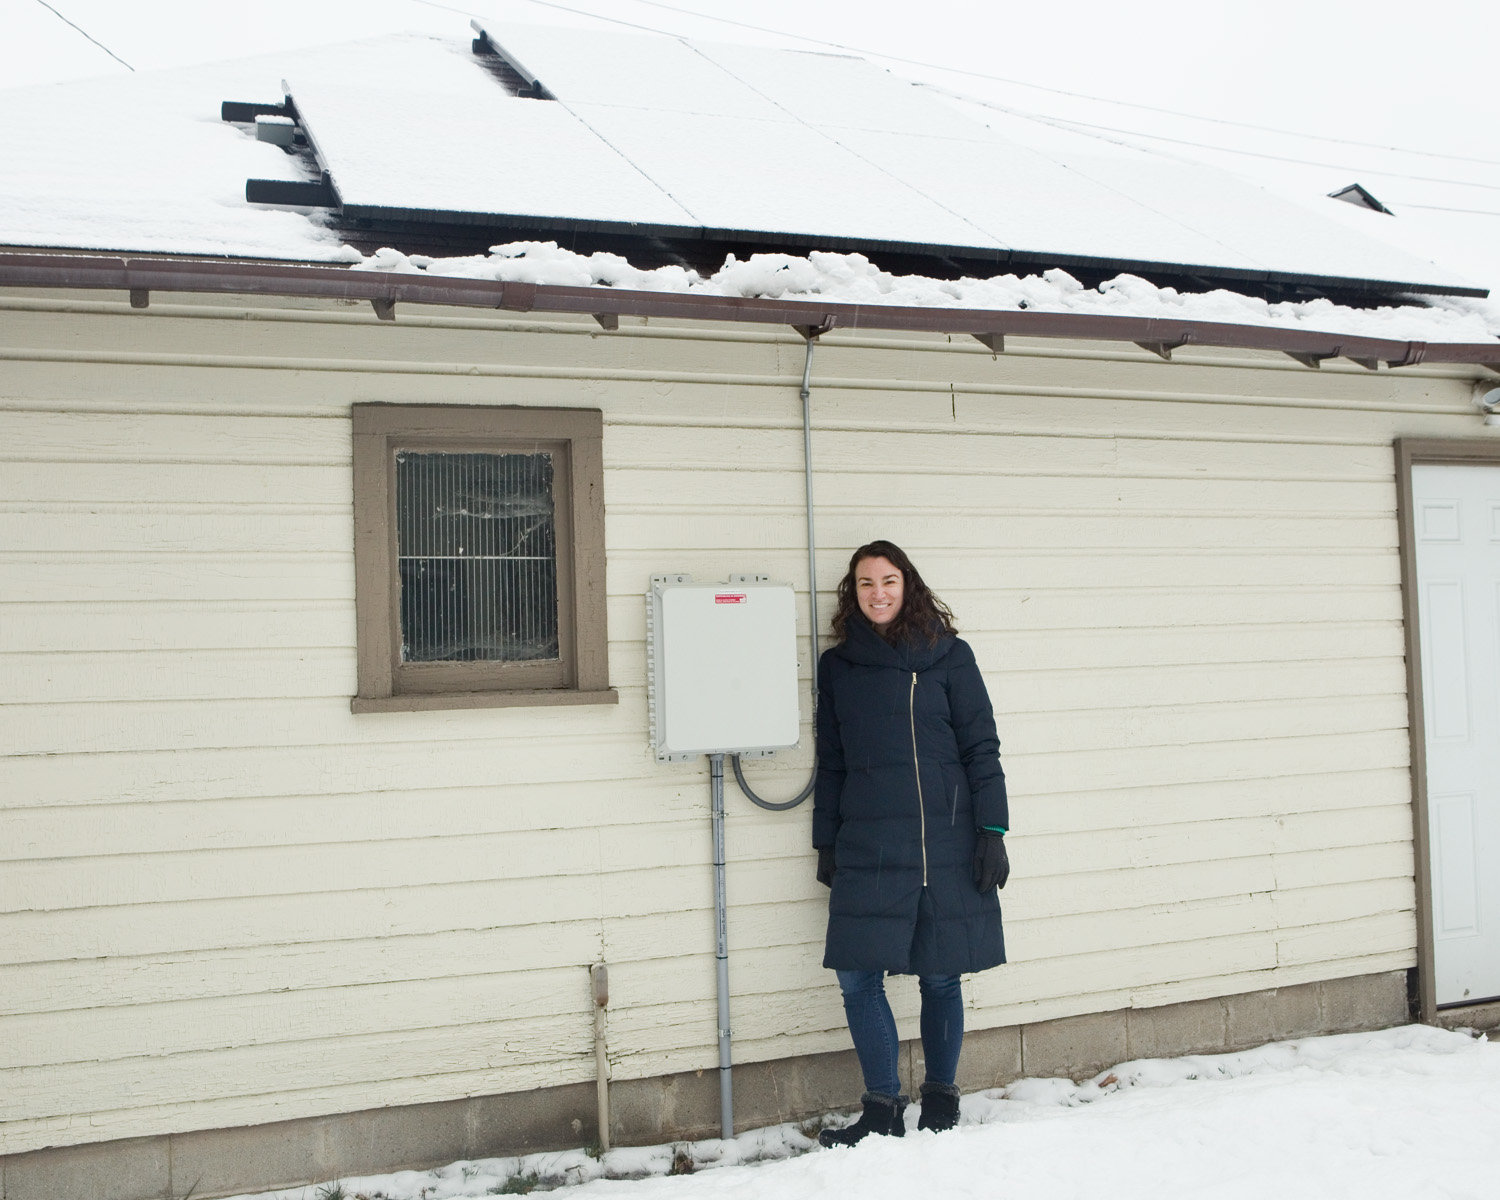 South Minneapolis homeowner Kelly Muellman installed solar panels on her garage in 2018, as a member of an earlier group of Twin Cities Solar United Neighbors. She said, "Being part of a co-op was great. Our neighbor group reviewed several bids from installers together, and chose the one we thought had the best reputation, warranty, and price." (Photo by Margie O’Loughlin)